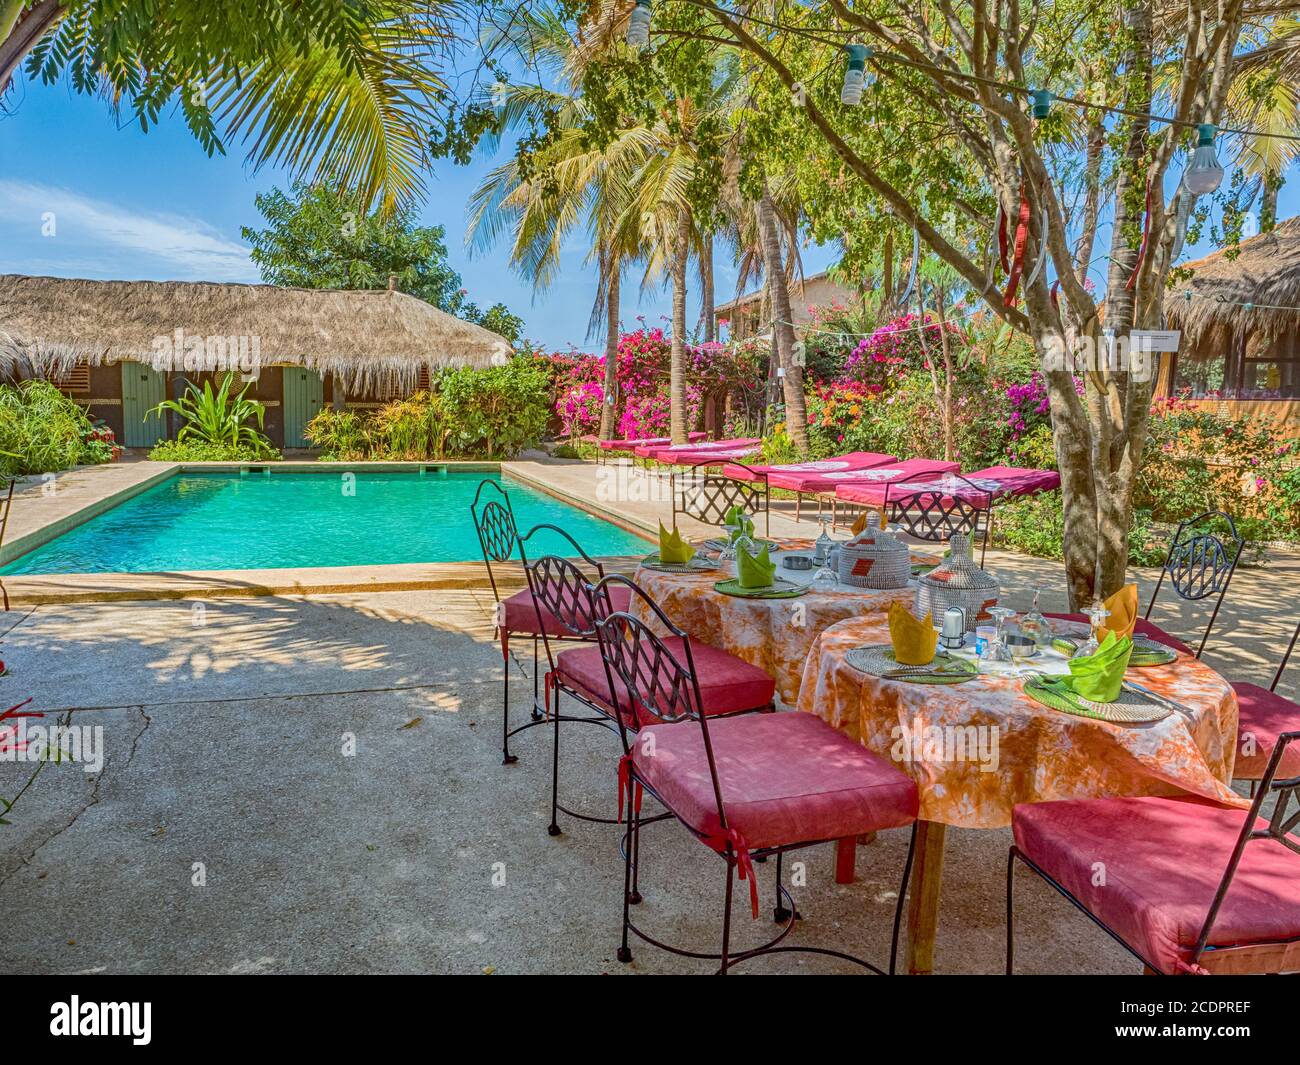 Senegal, Africa - January 2019: A covered table awaits guests next to the pool and African huts with palm leaf roofs. Holiday background. Relaxing vac Stock Photo